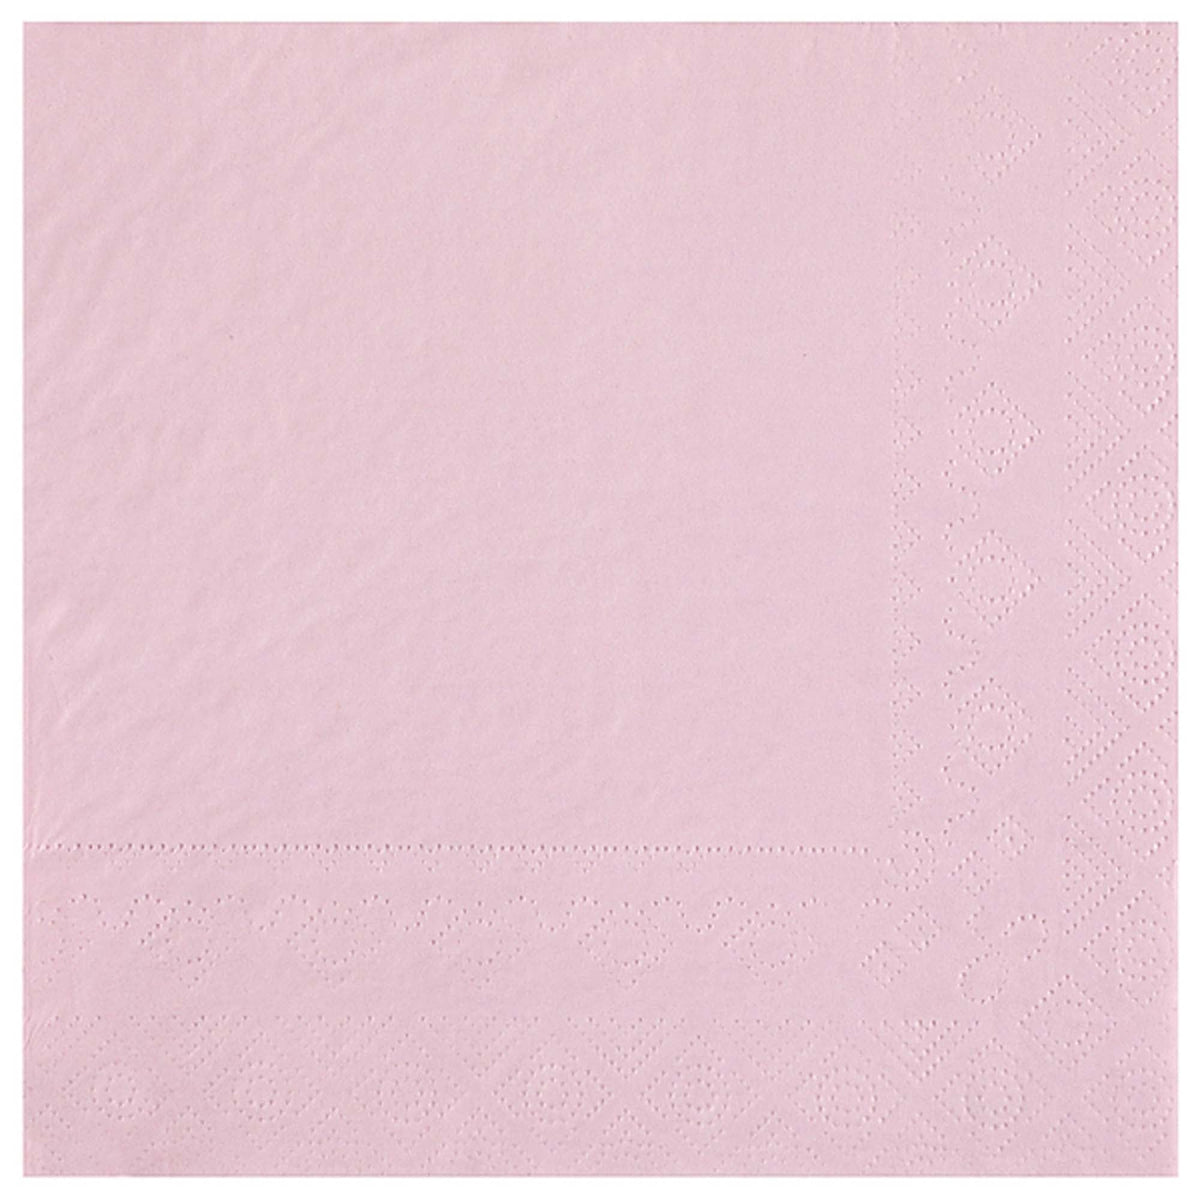 SANTEX Everyday Entertaining Light Pink Large Lunch Paper Party Napkins, 25 Count 3660380090311